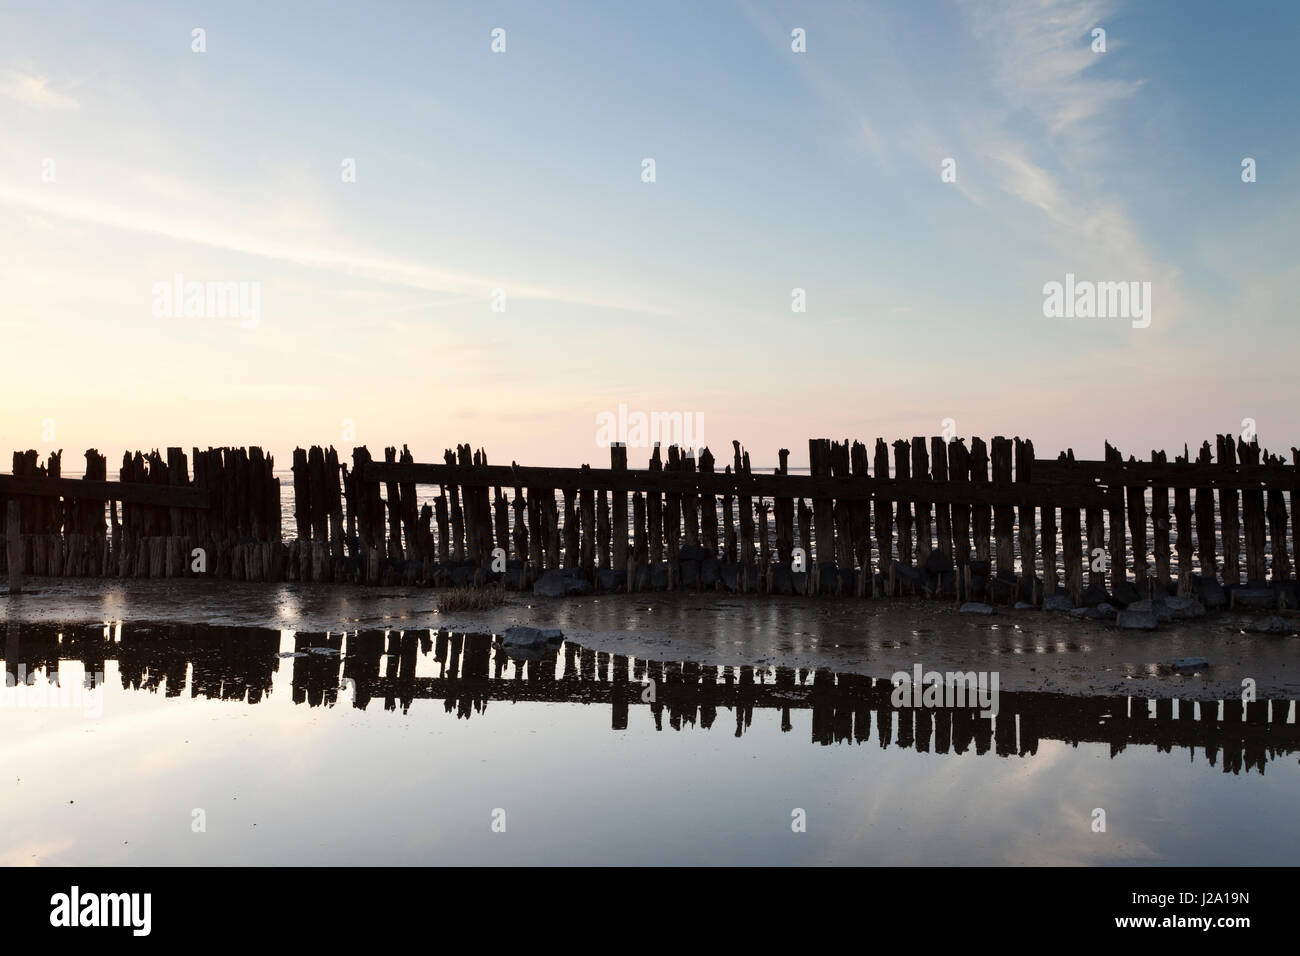 Worn out wooden breakwater in Waddensea at sunset Stock Photo